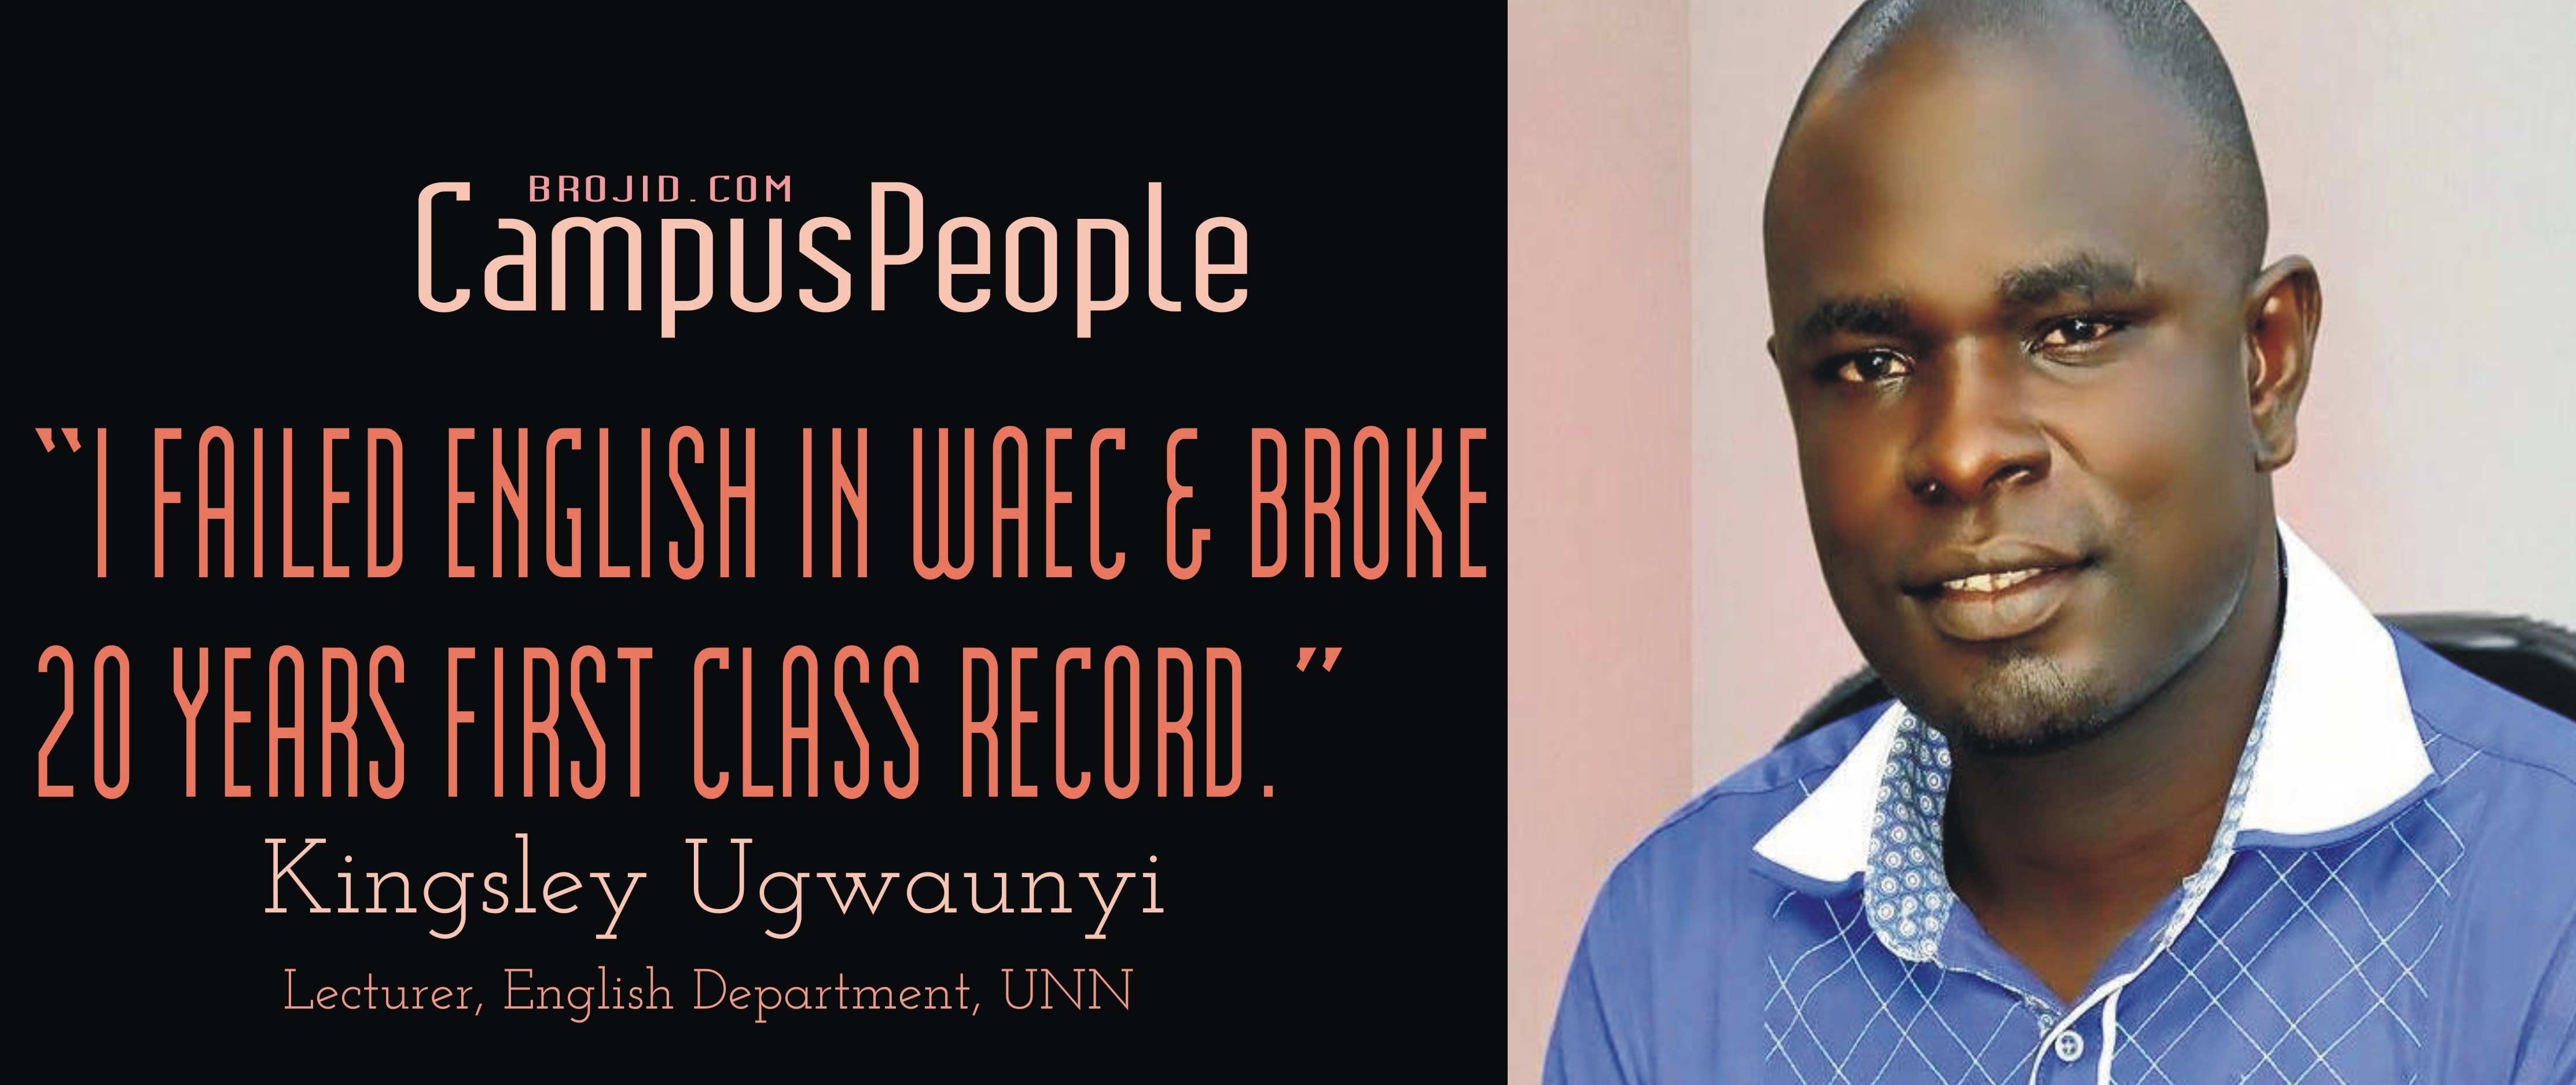 [INTERVIEW] “I FAILED ENGLISH IN WAEC & BROKE 20 YEARS FIRST CLASS RECORD IN ENGLISH DEPARTMENT” ~KINGSLEY UGWUANYI, LECTURER, ENGLSIH DEPARTMENT, UNN